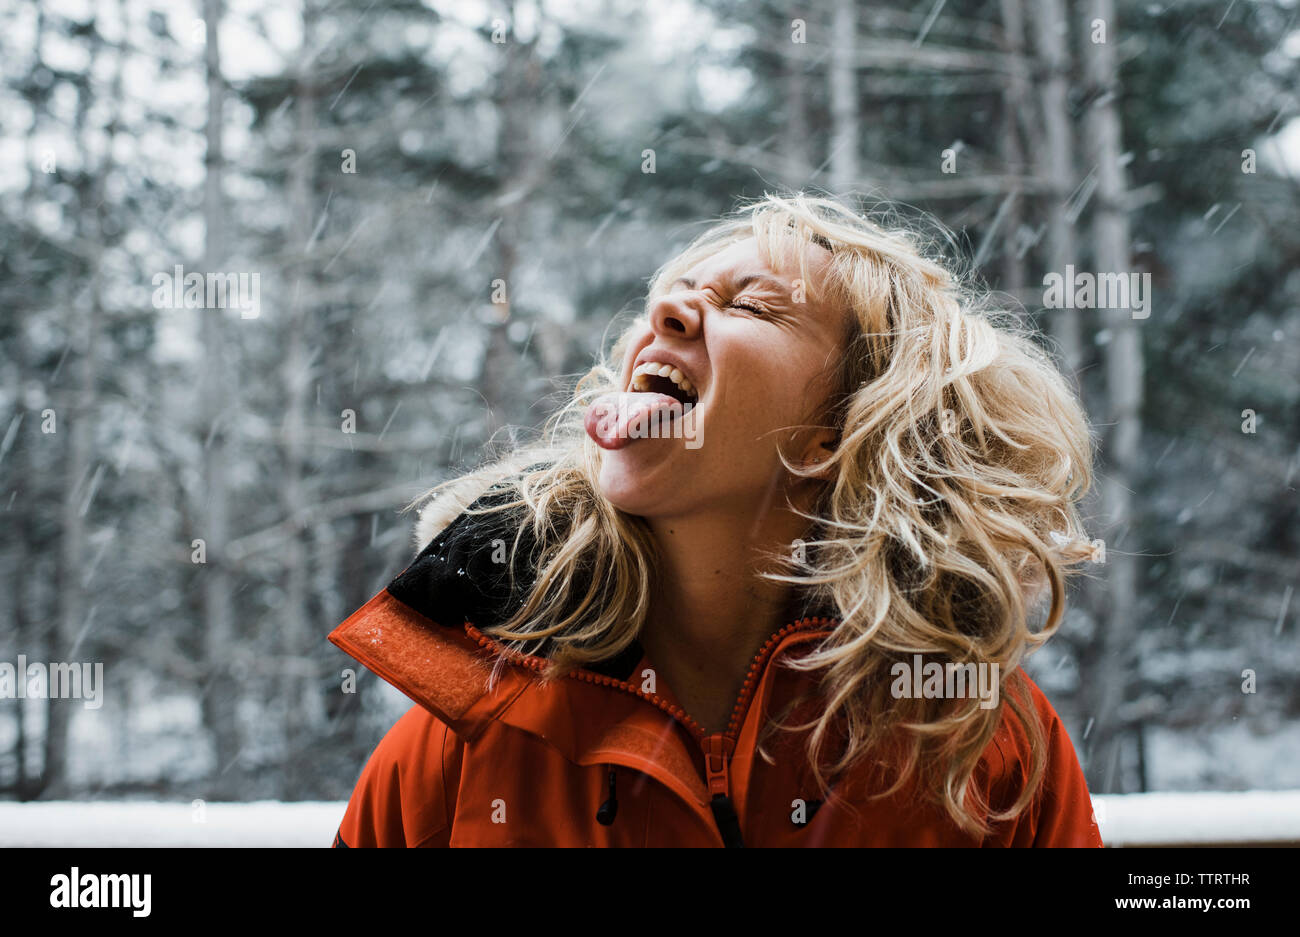 Woman with eyes closed sticking out tongue while standing in forest during snowfall Stock Photo